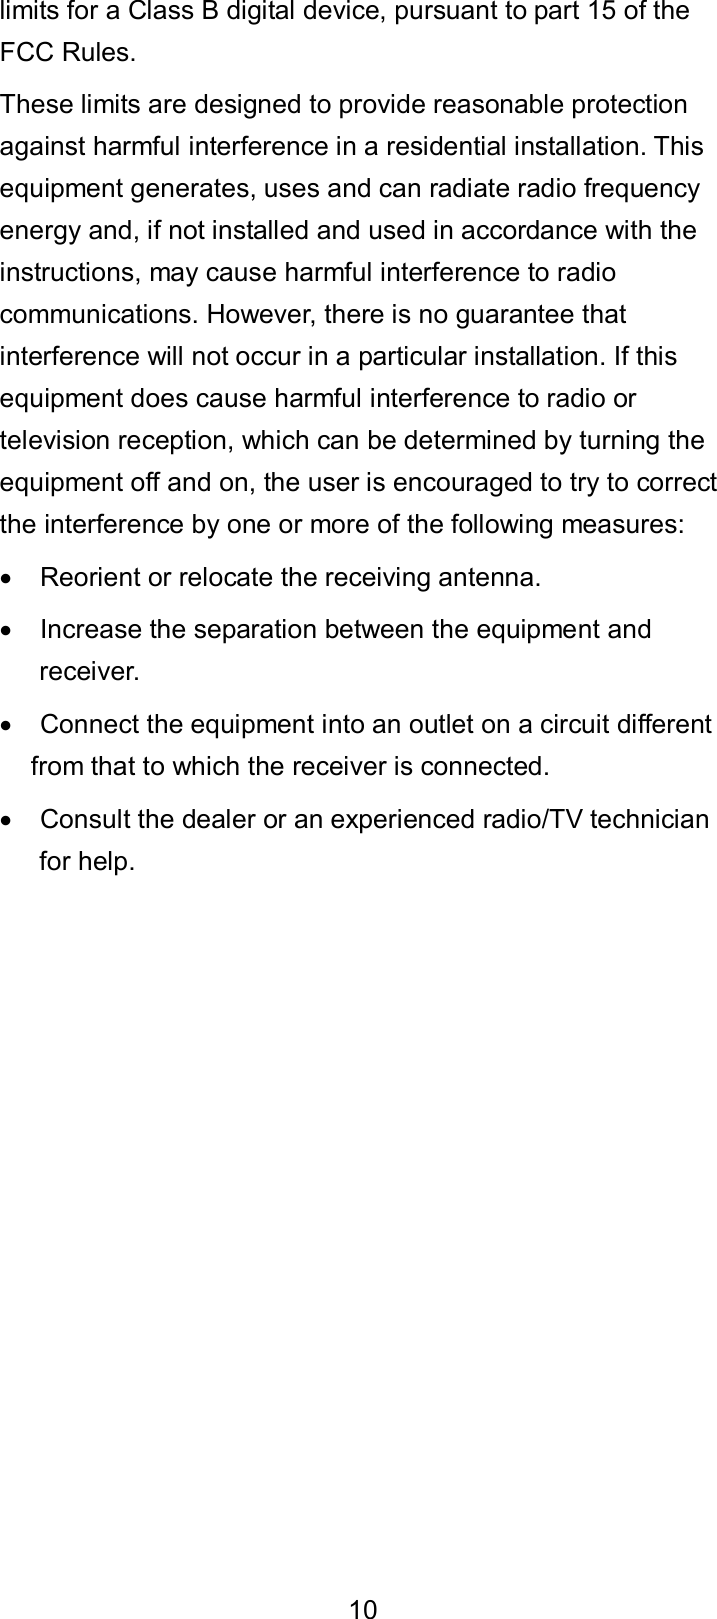  10 limits for a Class B digital device, pursuant to part 15 of the FCC Rules.   These limits are designed to provide reasonable protection against harmful interference in a residential installation. This equipment generates, uses and can radiate radio frequency energy and, if not installed and used in accordance with the instructions, may cause harmful interference to radio communications. However, there is no guarantee that interference will not occur in a particular installation. If this equipment does cause harmful interference to radio or television reception, which can be determined by turning the equipment off and on, the user is encouraged to try to correct the interference by one or more of the following measures:   Reorient or relocate the receiving antenna.   Increase the separation between the equipment and receiver.   Connect the equipment into an outlet on a circuit different from that to which the receiver is connected.   Consult the dealer or an experienced radio/TV technician for help. 